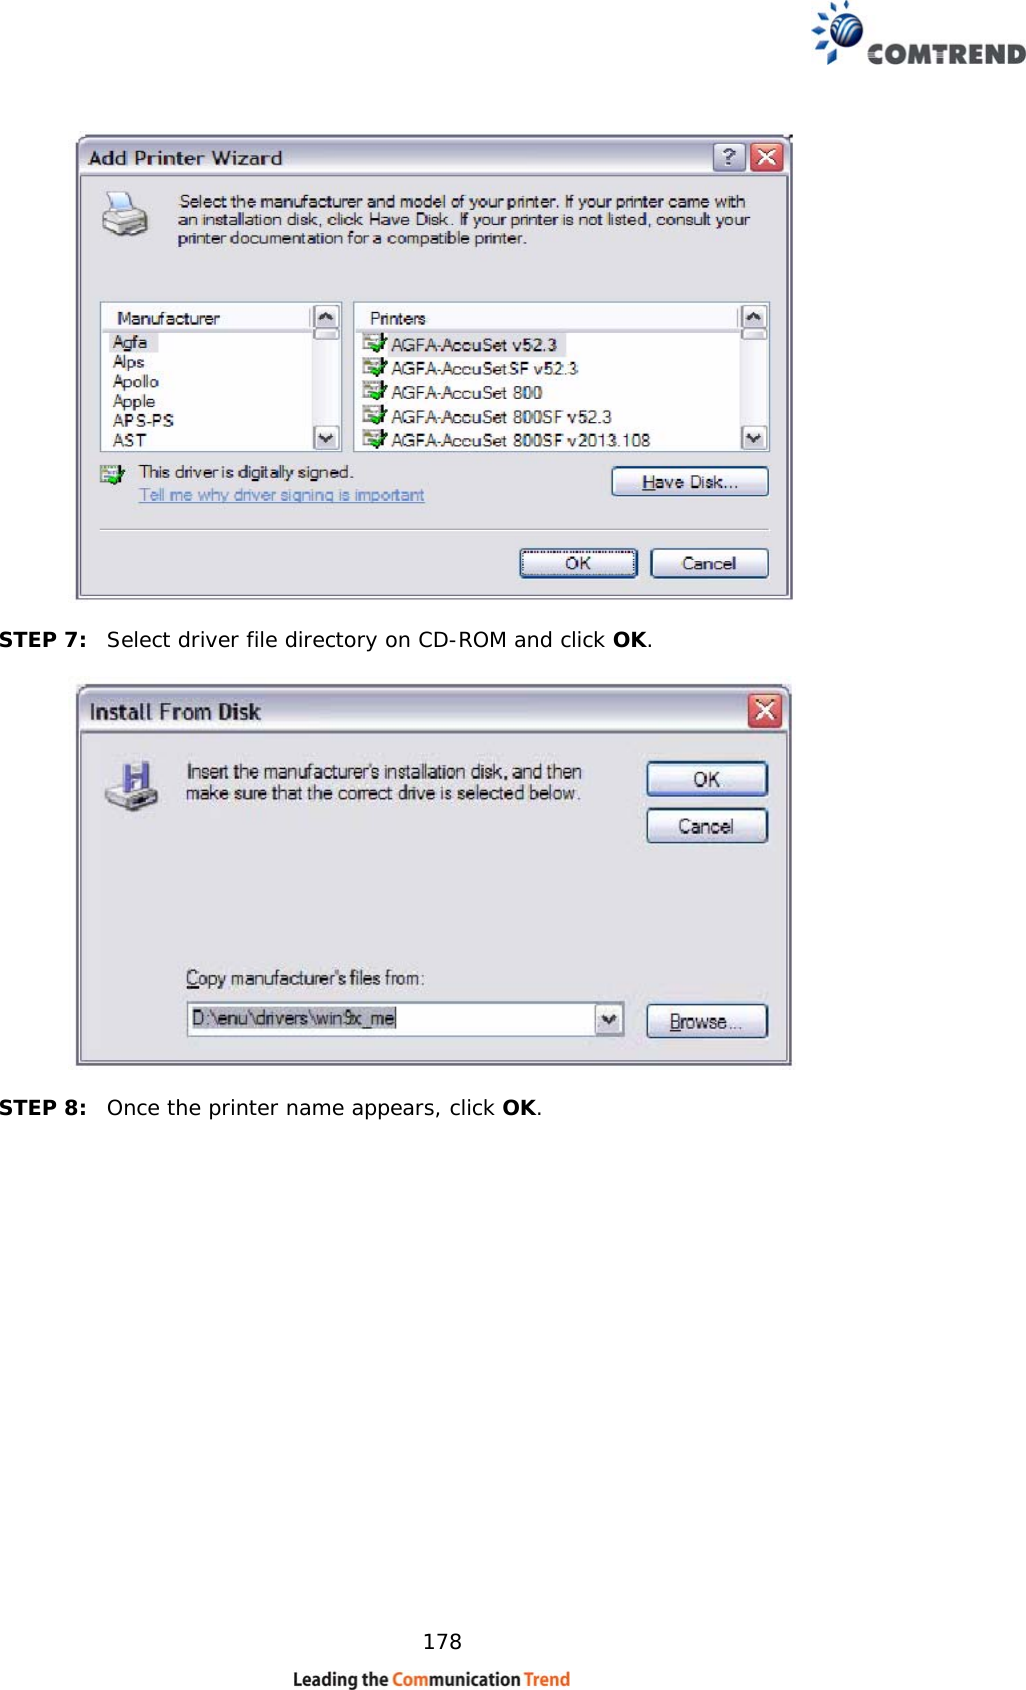    178   STEP 7:  Select driver file directory on CD-ROM and click OK.    STEP 8:  Once the printer name appears, click OK.  